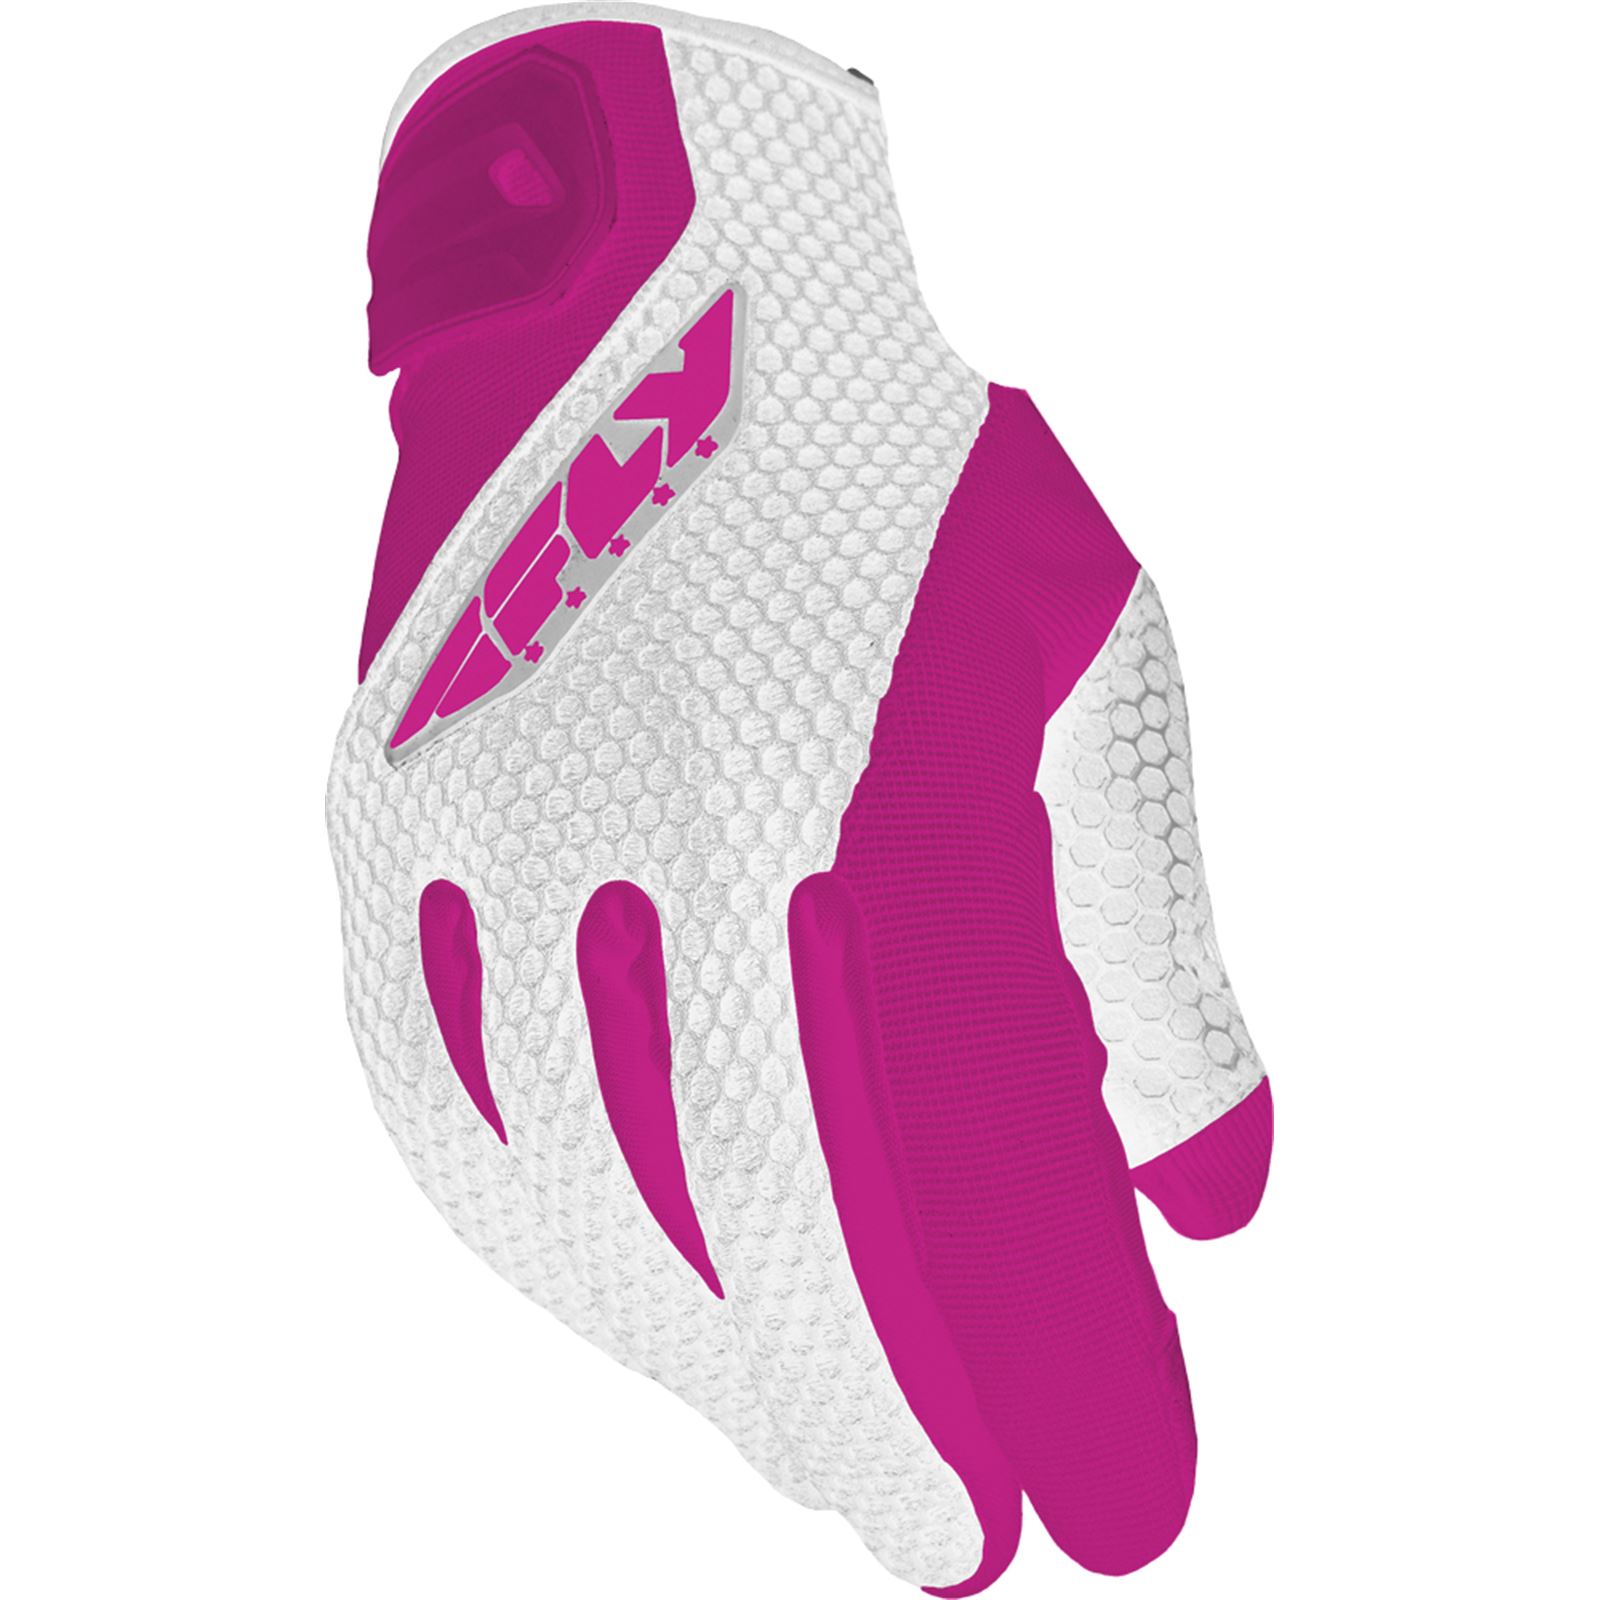 Fly Racing Women's CoolPro Gloves